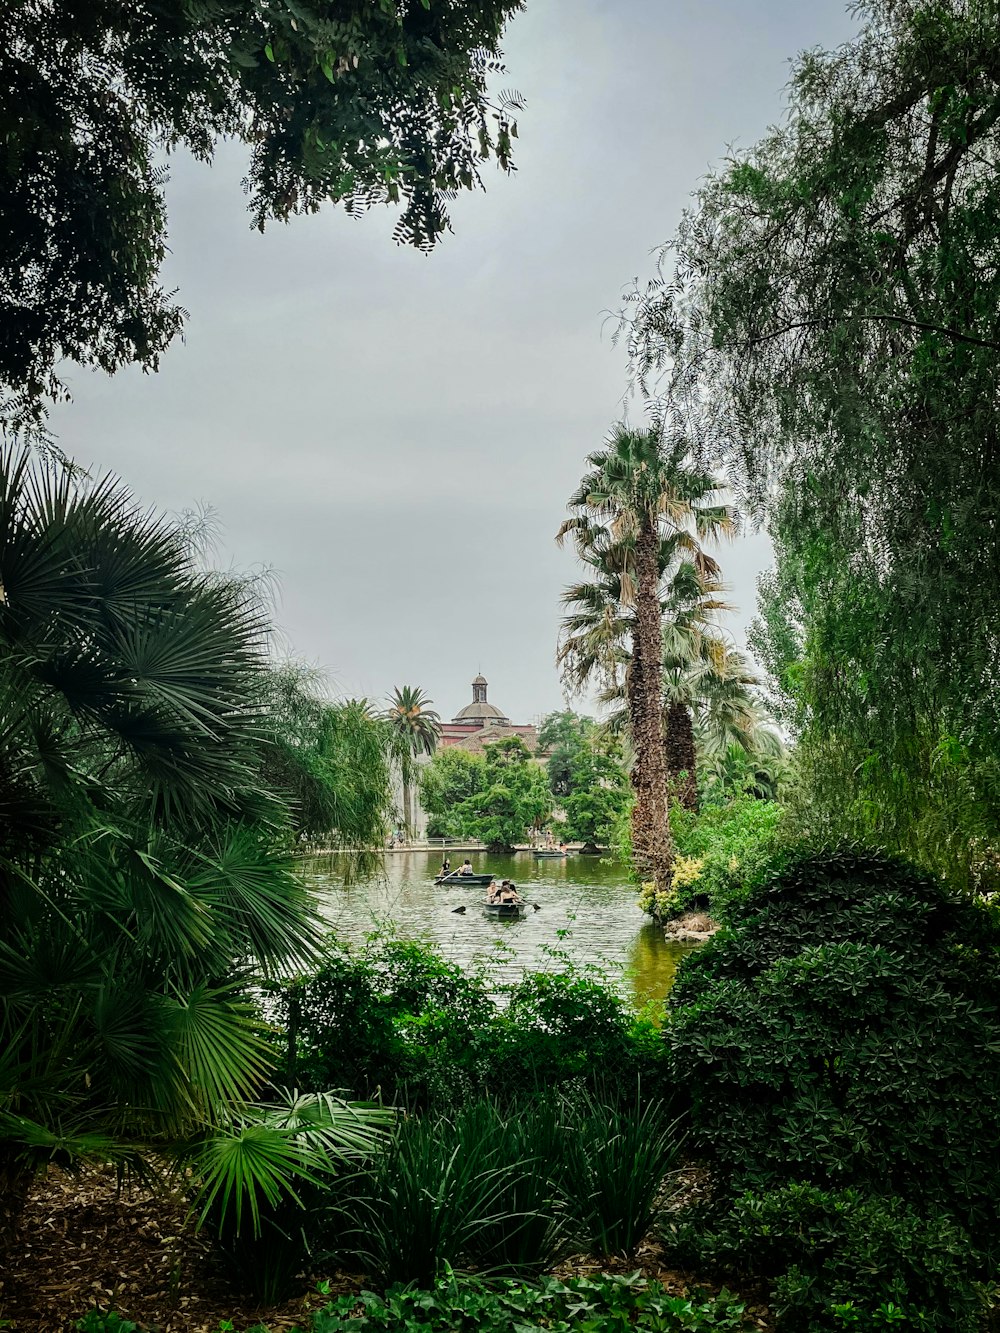 a pond surrounded by palm trees and greenery